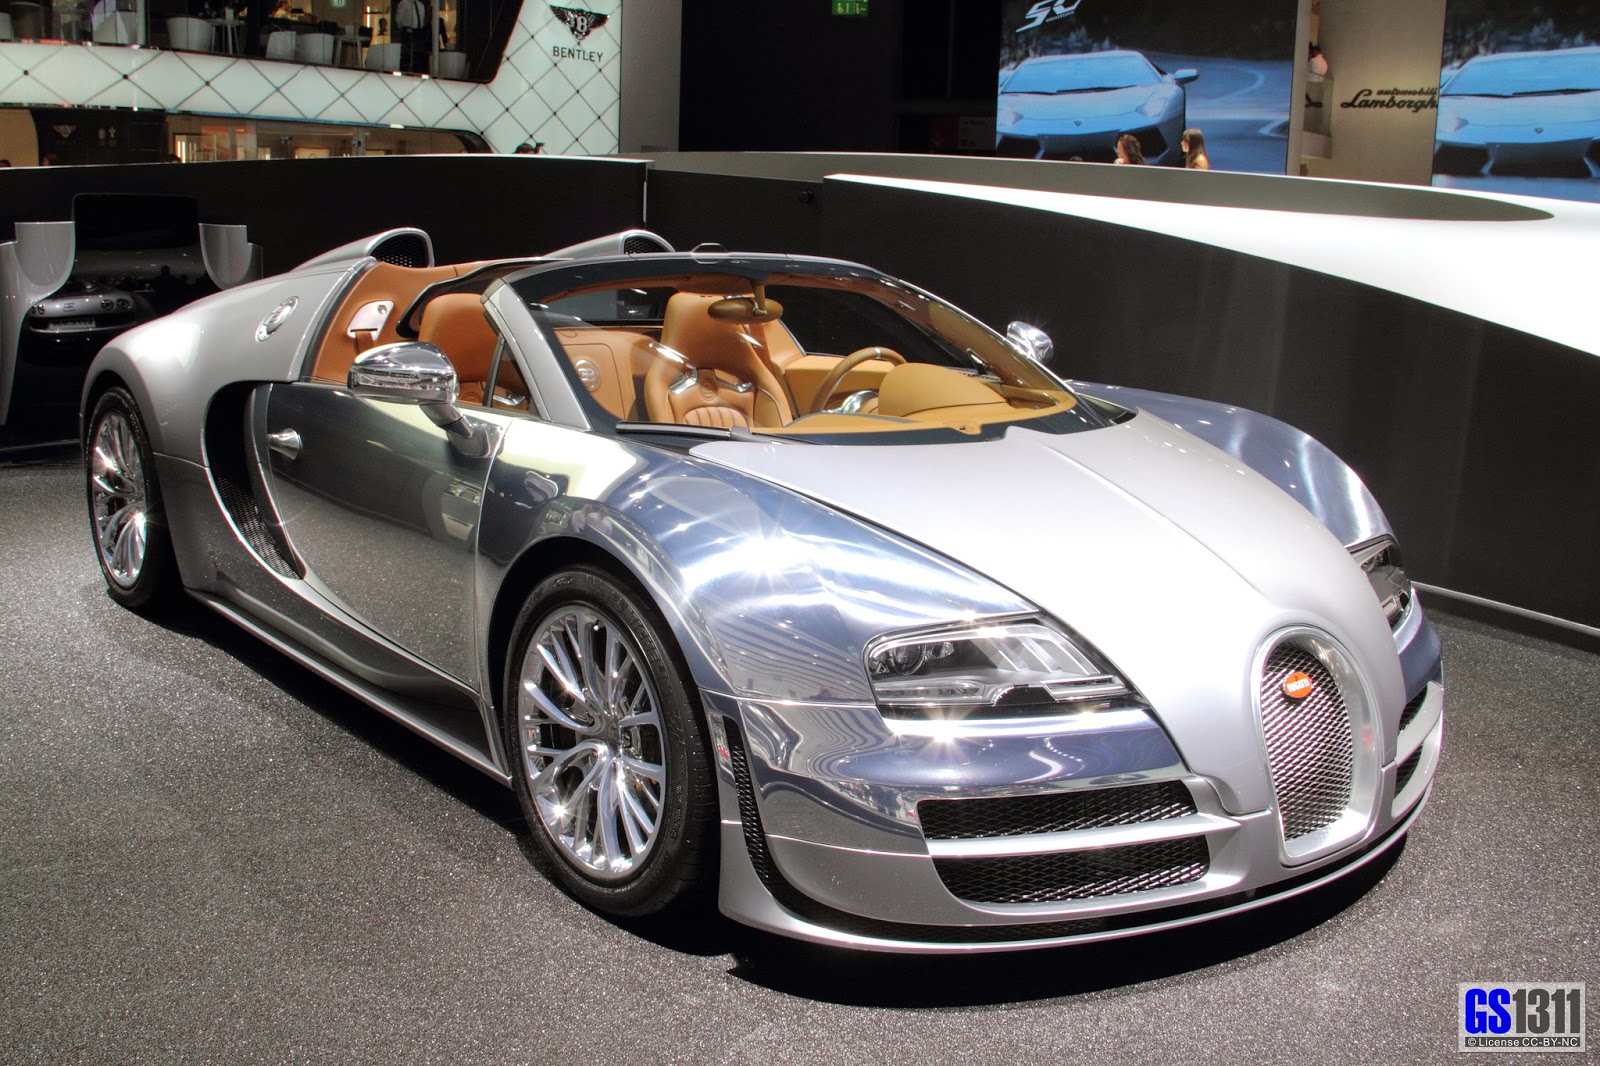 Blok888: Top 10 Most Expensive Cars in the world 2014